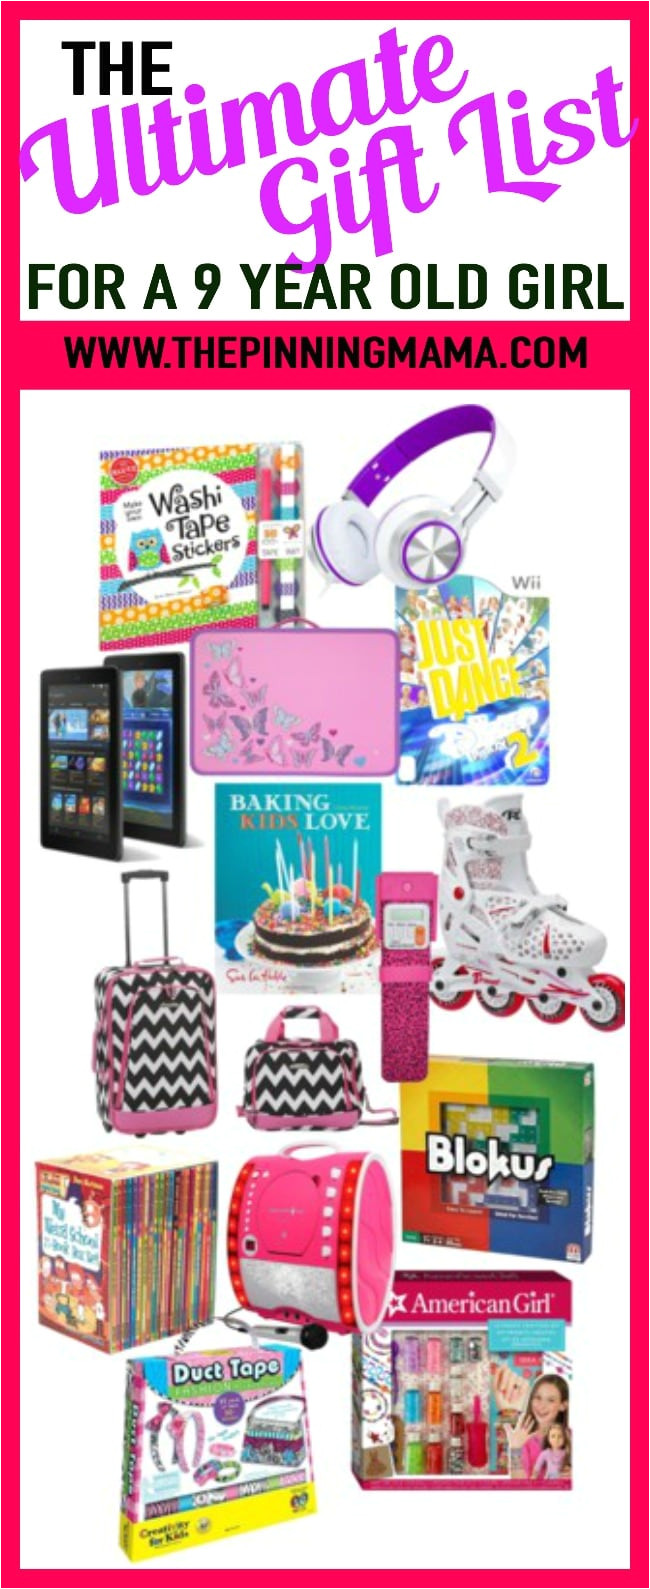 the best gift ideas for a 9 year old girl includes ideas for games